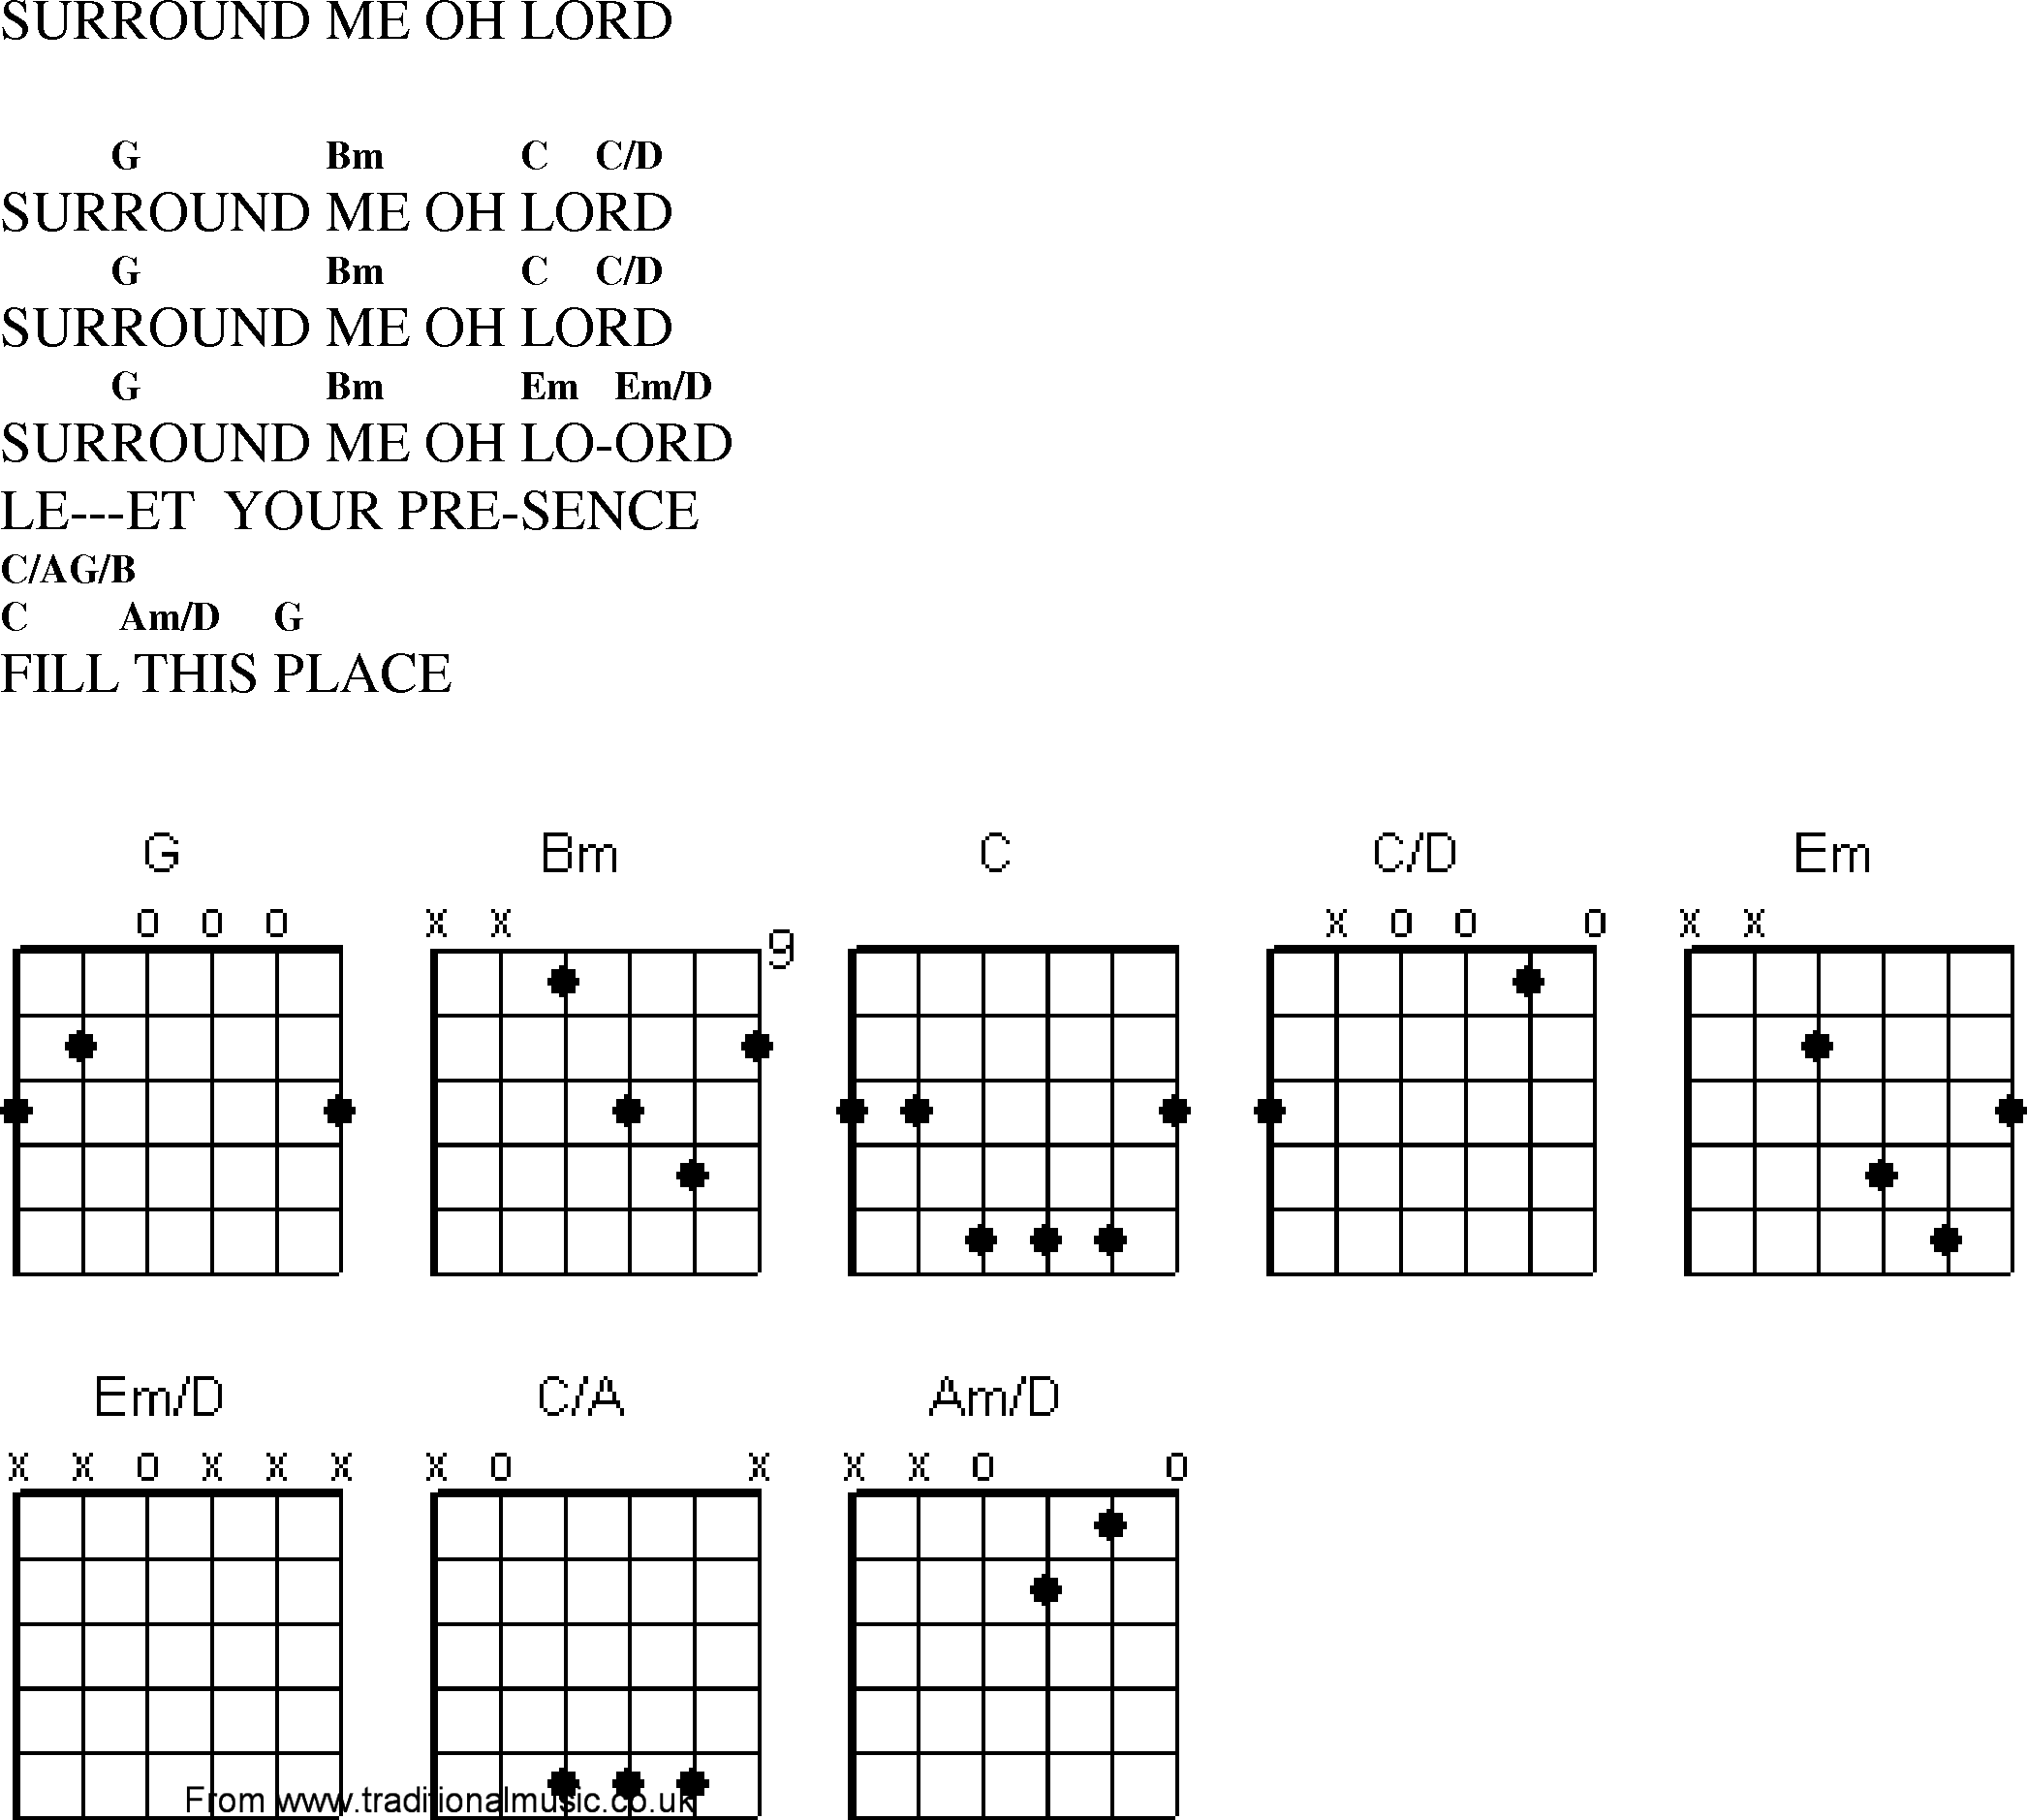 Gospel Song: surround_me_oh_lord, lyrics and chords.